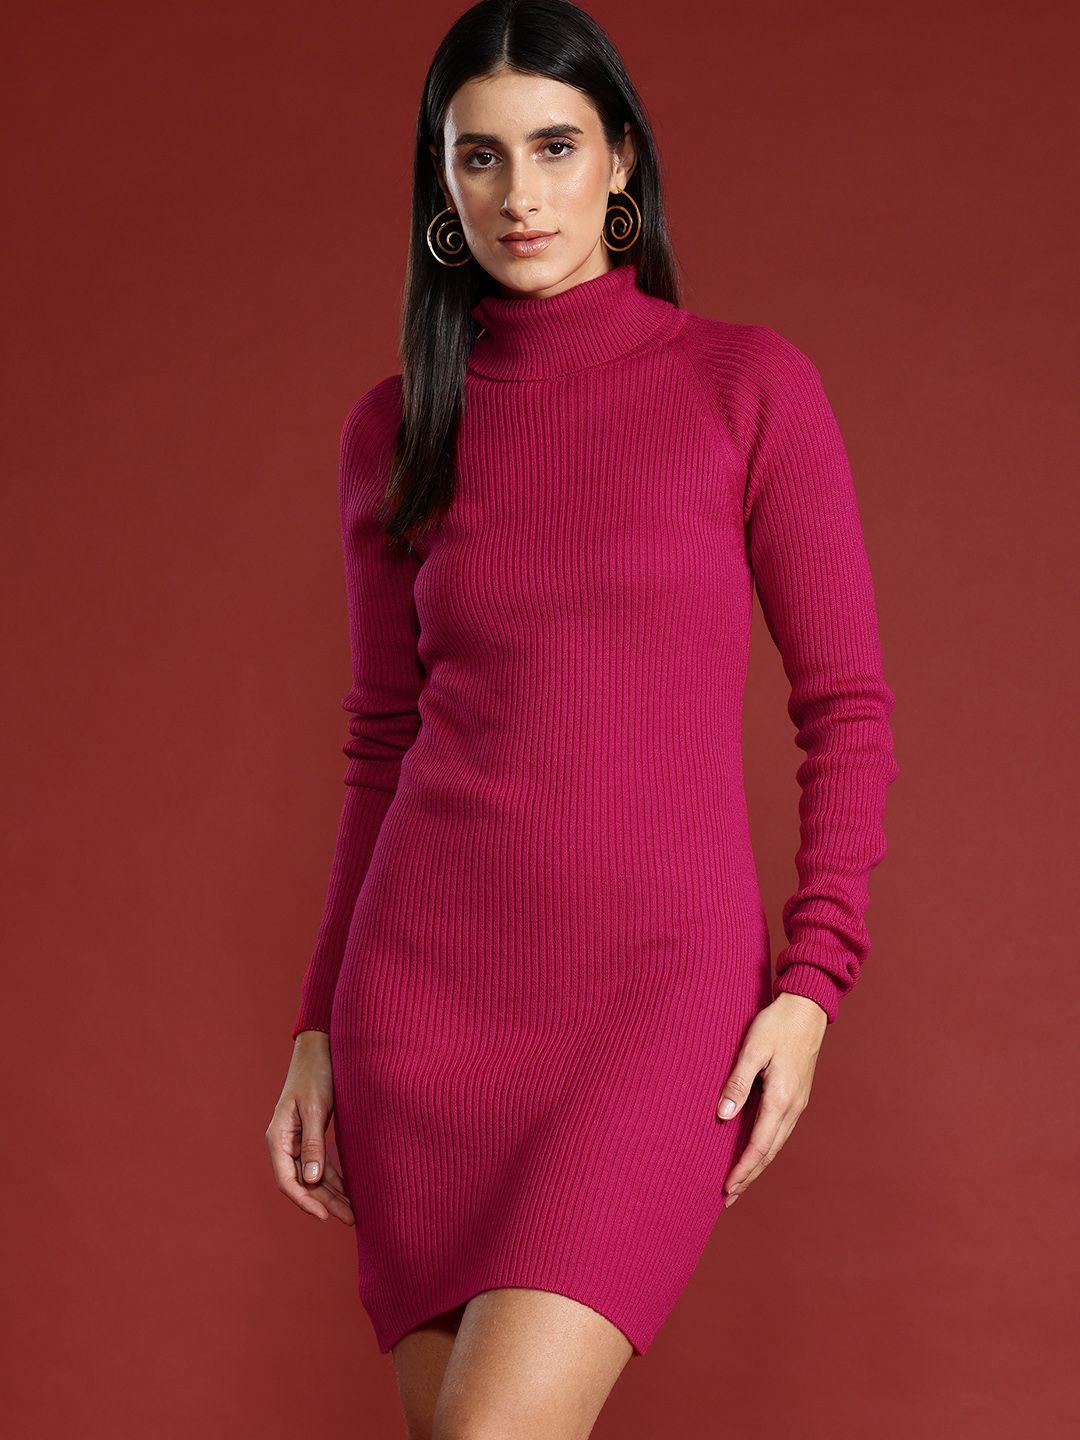 all-about-you-solid-turtle-neck-raglan-sleeves-ribbed-acrylic-jumper-dress